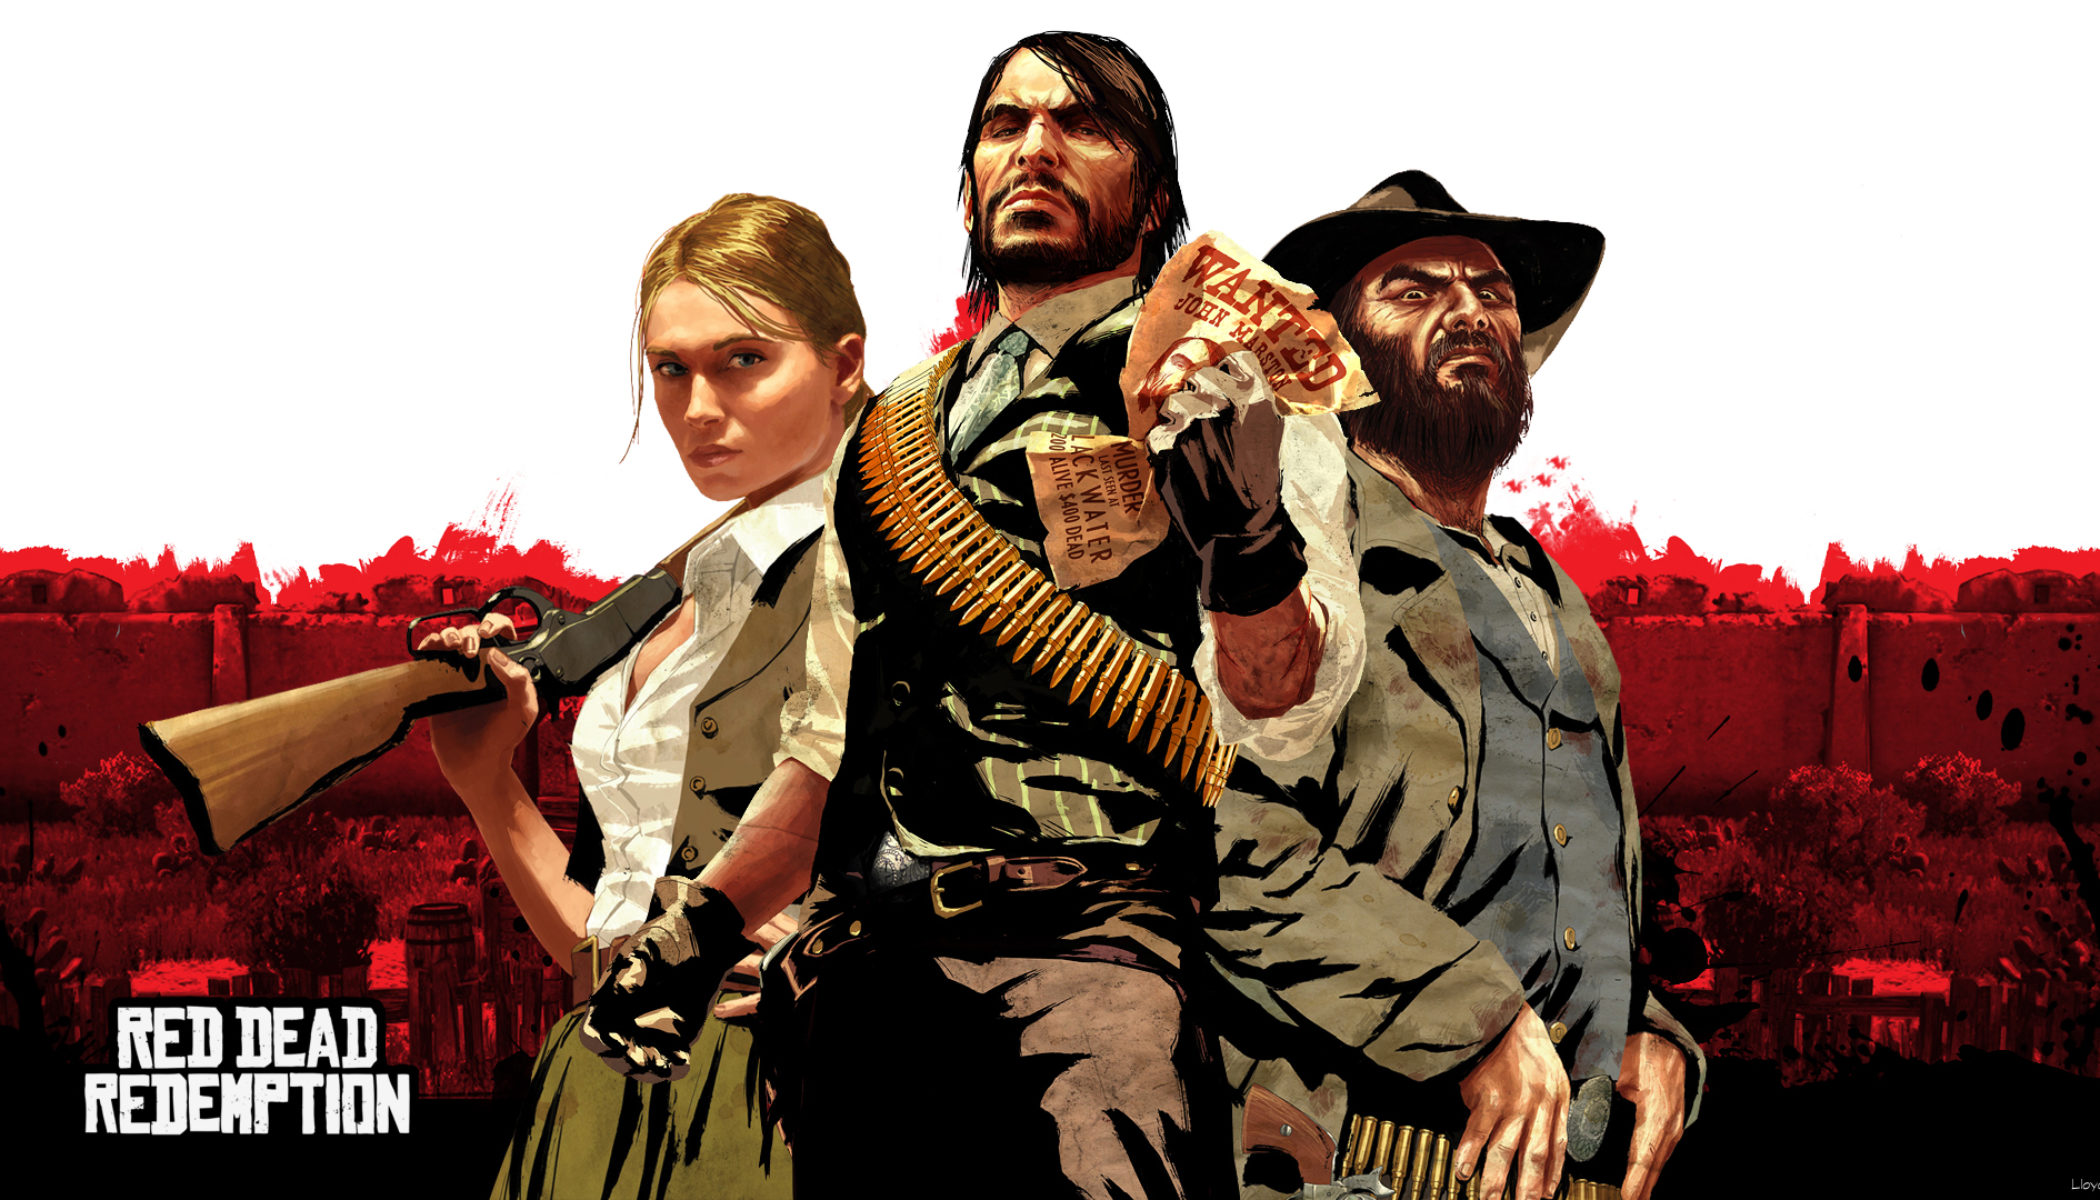 200+] Red Dead Redemption 2 Wallpapers